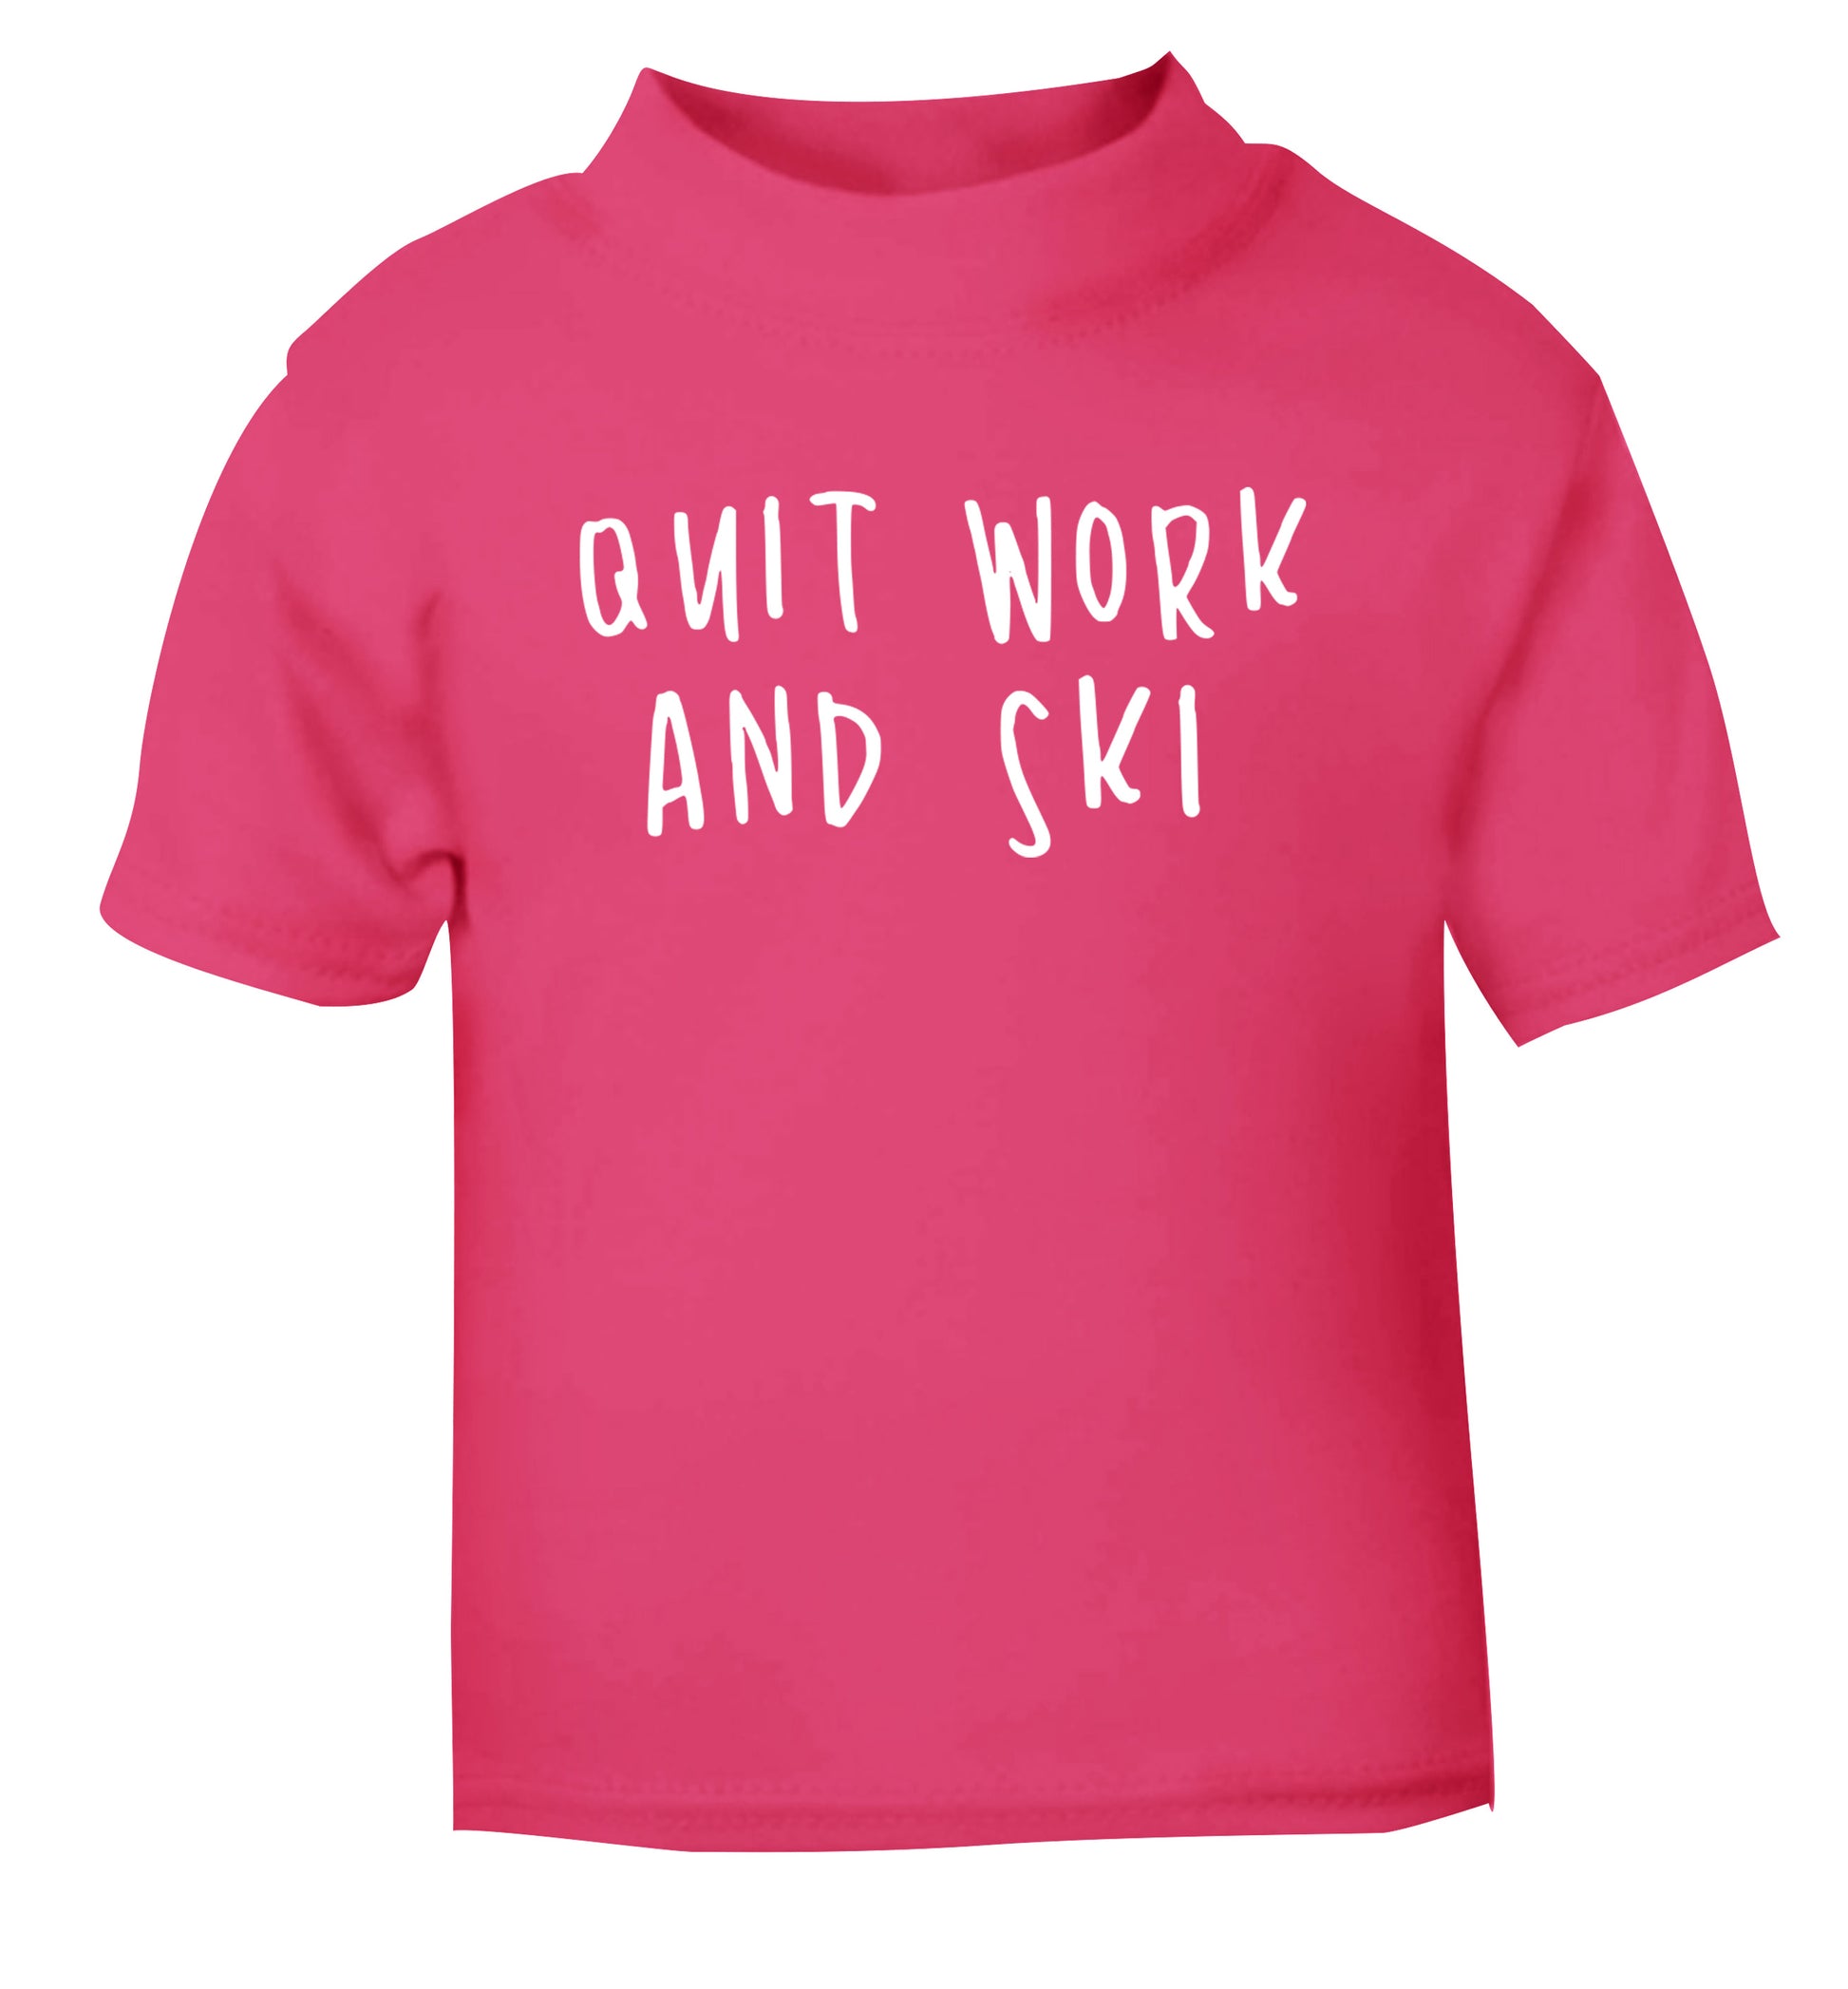 Quit work and ski pink Baby Toddler Tshirt 2 Years